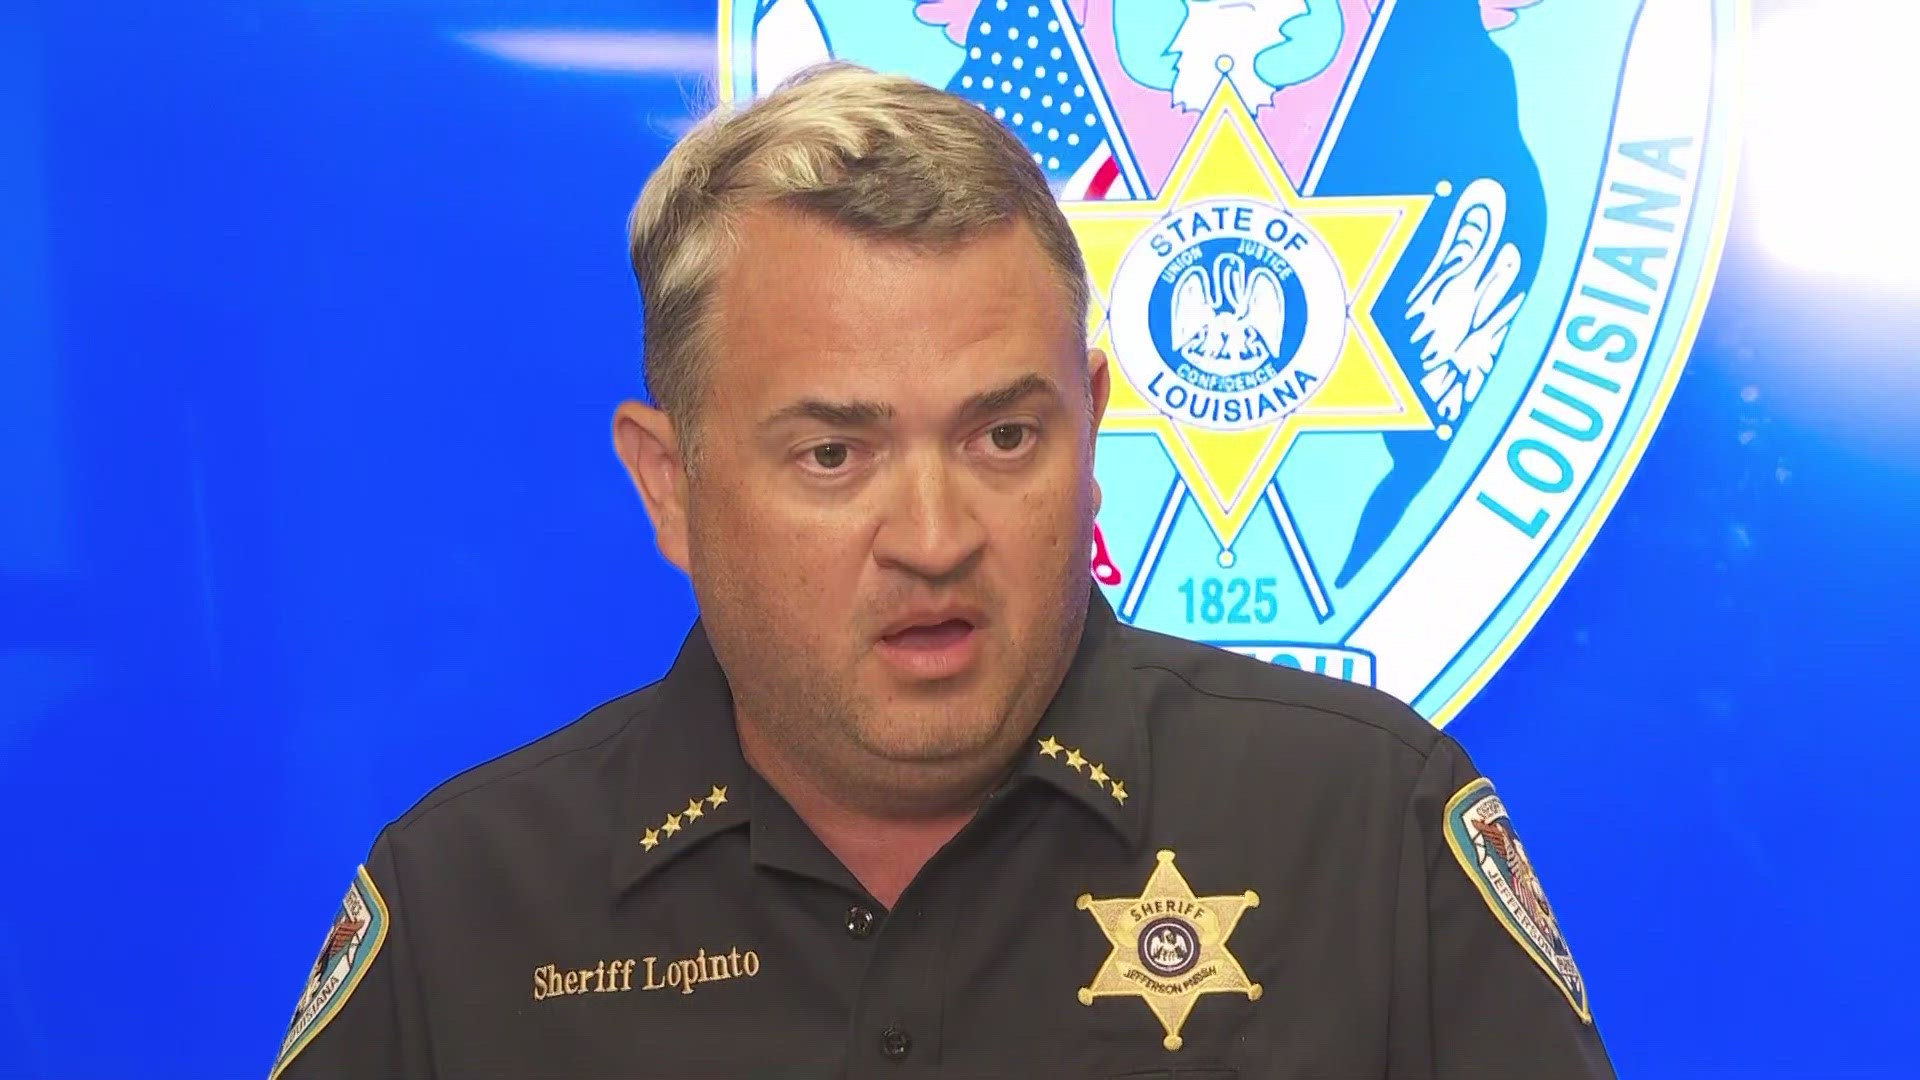 JP Sheriff Joe Lopinto said that a young girl's body was found in a bucket in the front yard of the biological mother's home. The father's girlfriend is in custody.